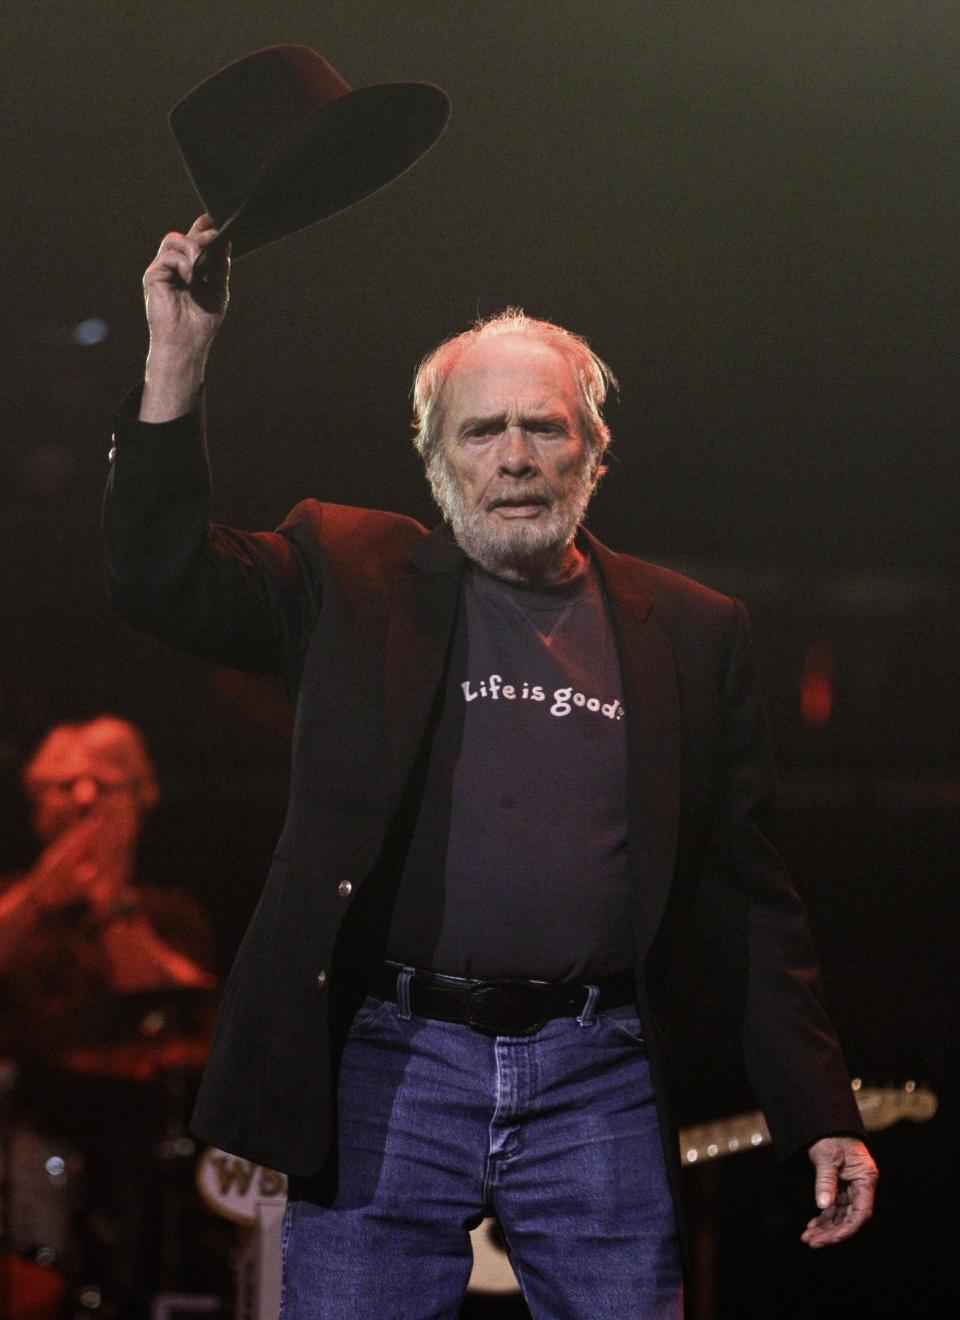 Merle Haggard acknowledges an ovation as he takes the stage during the All for the Hall concert on Tuesday, April 10, 2012, in Nashville, Tenn. The concert is a benefit for the Country Music Hall of Fame and Museum. (AP Photo/Mark Humphrey)